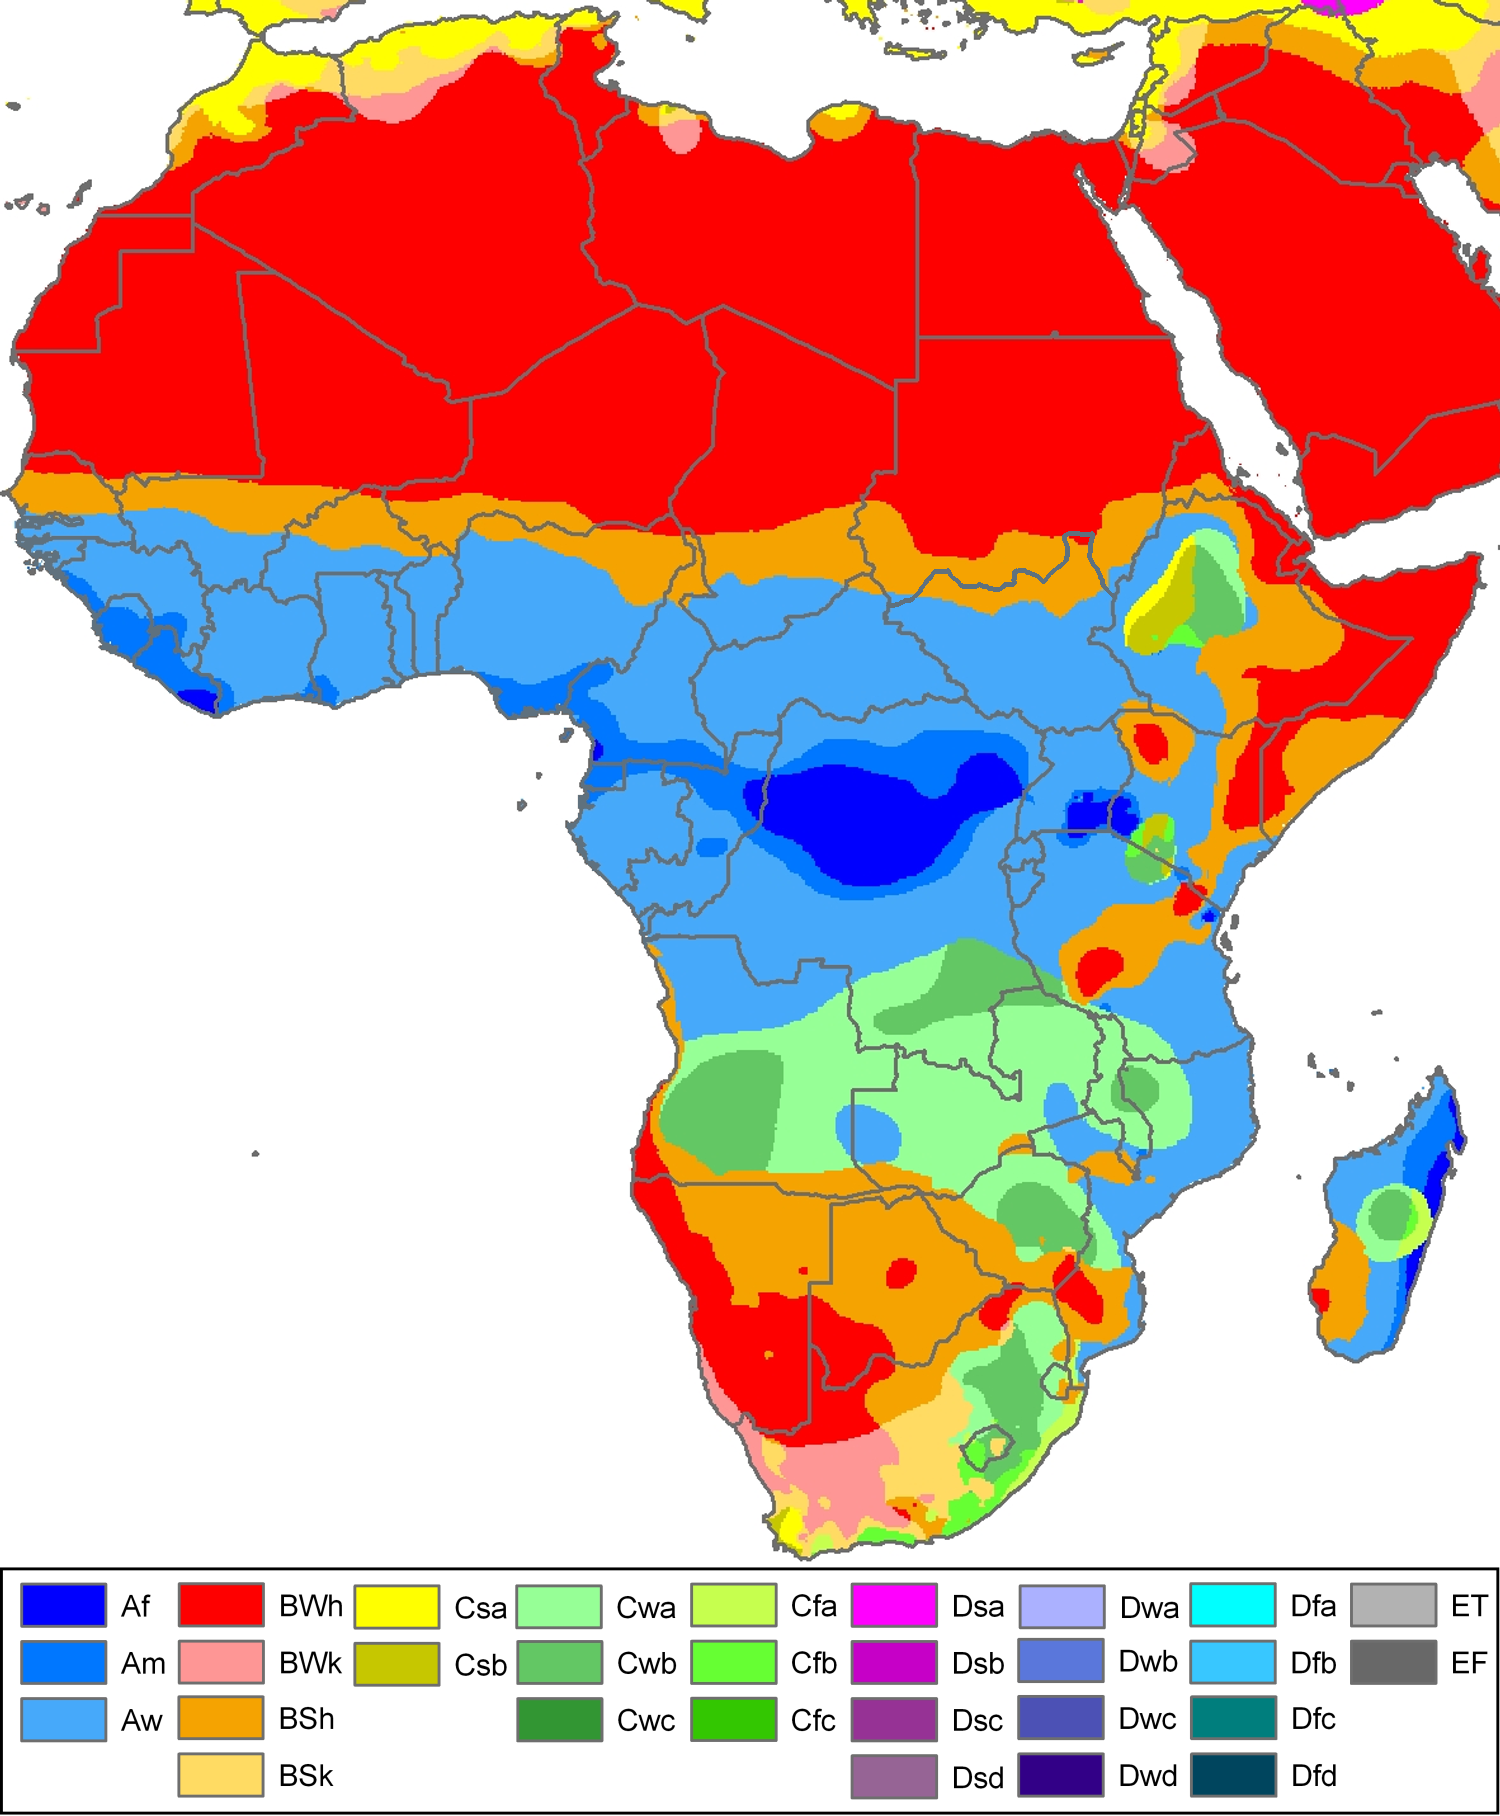 Africa_K%C3%B6ppen_Map.png